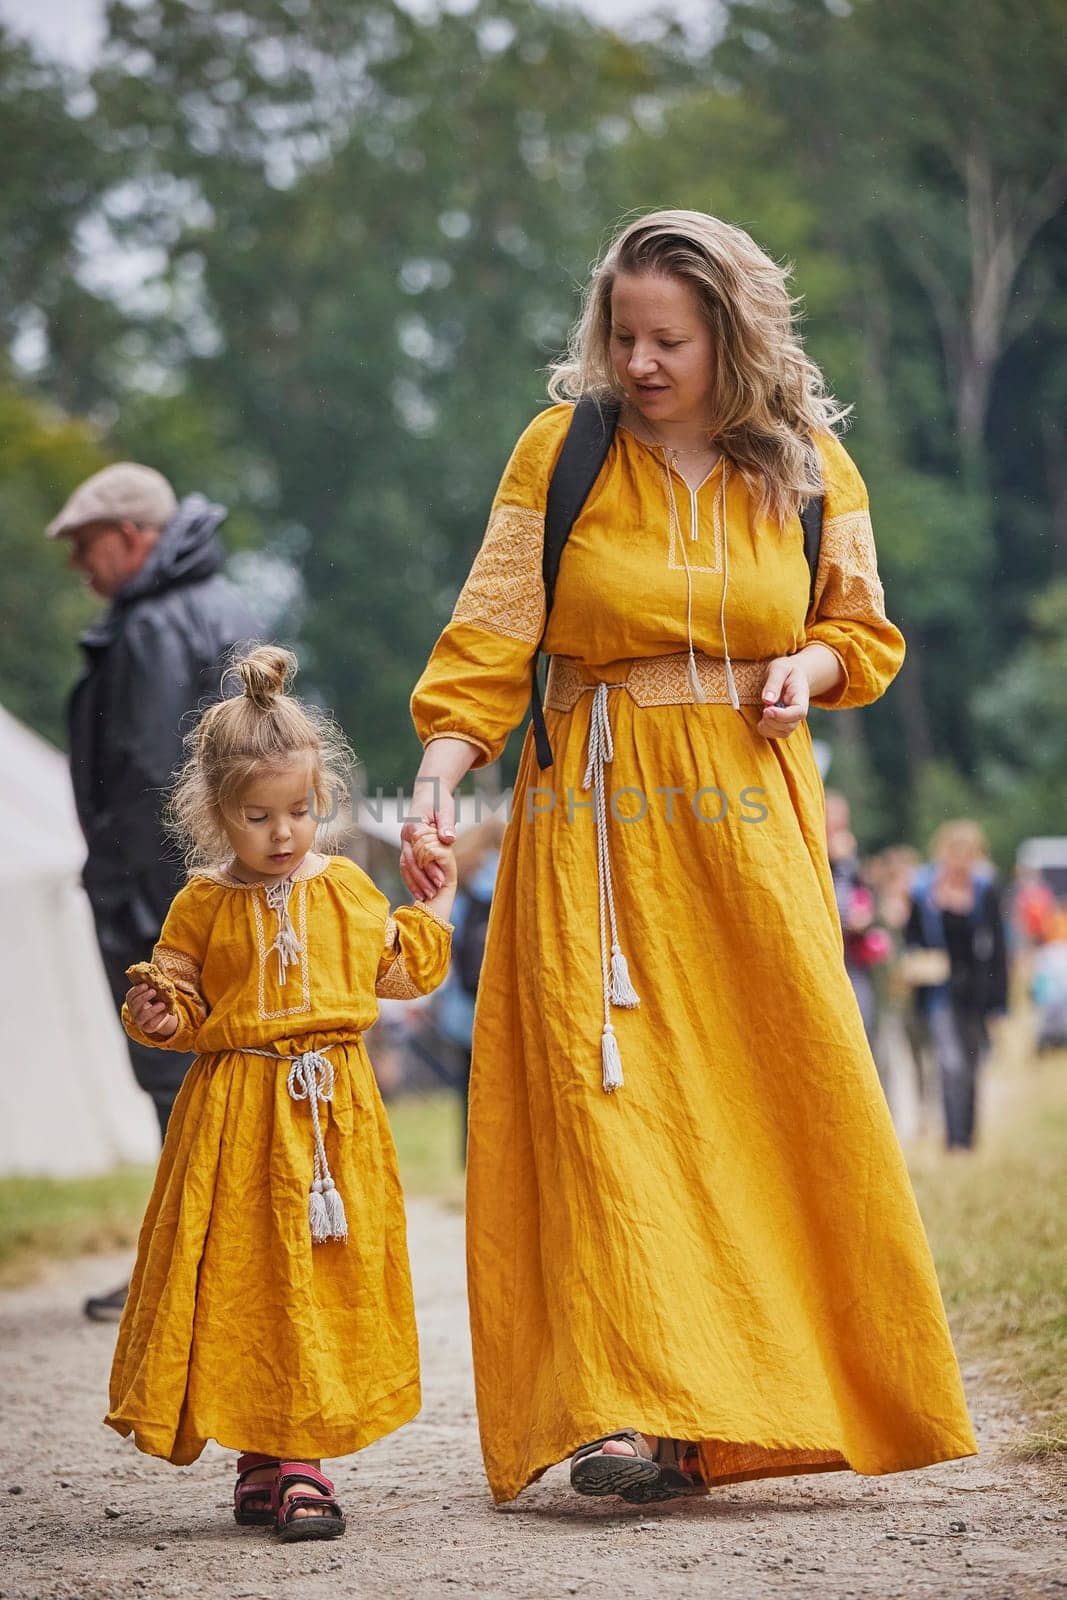 Beautiful woman with her daughter dressed in embroidered dresses.